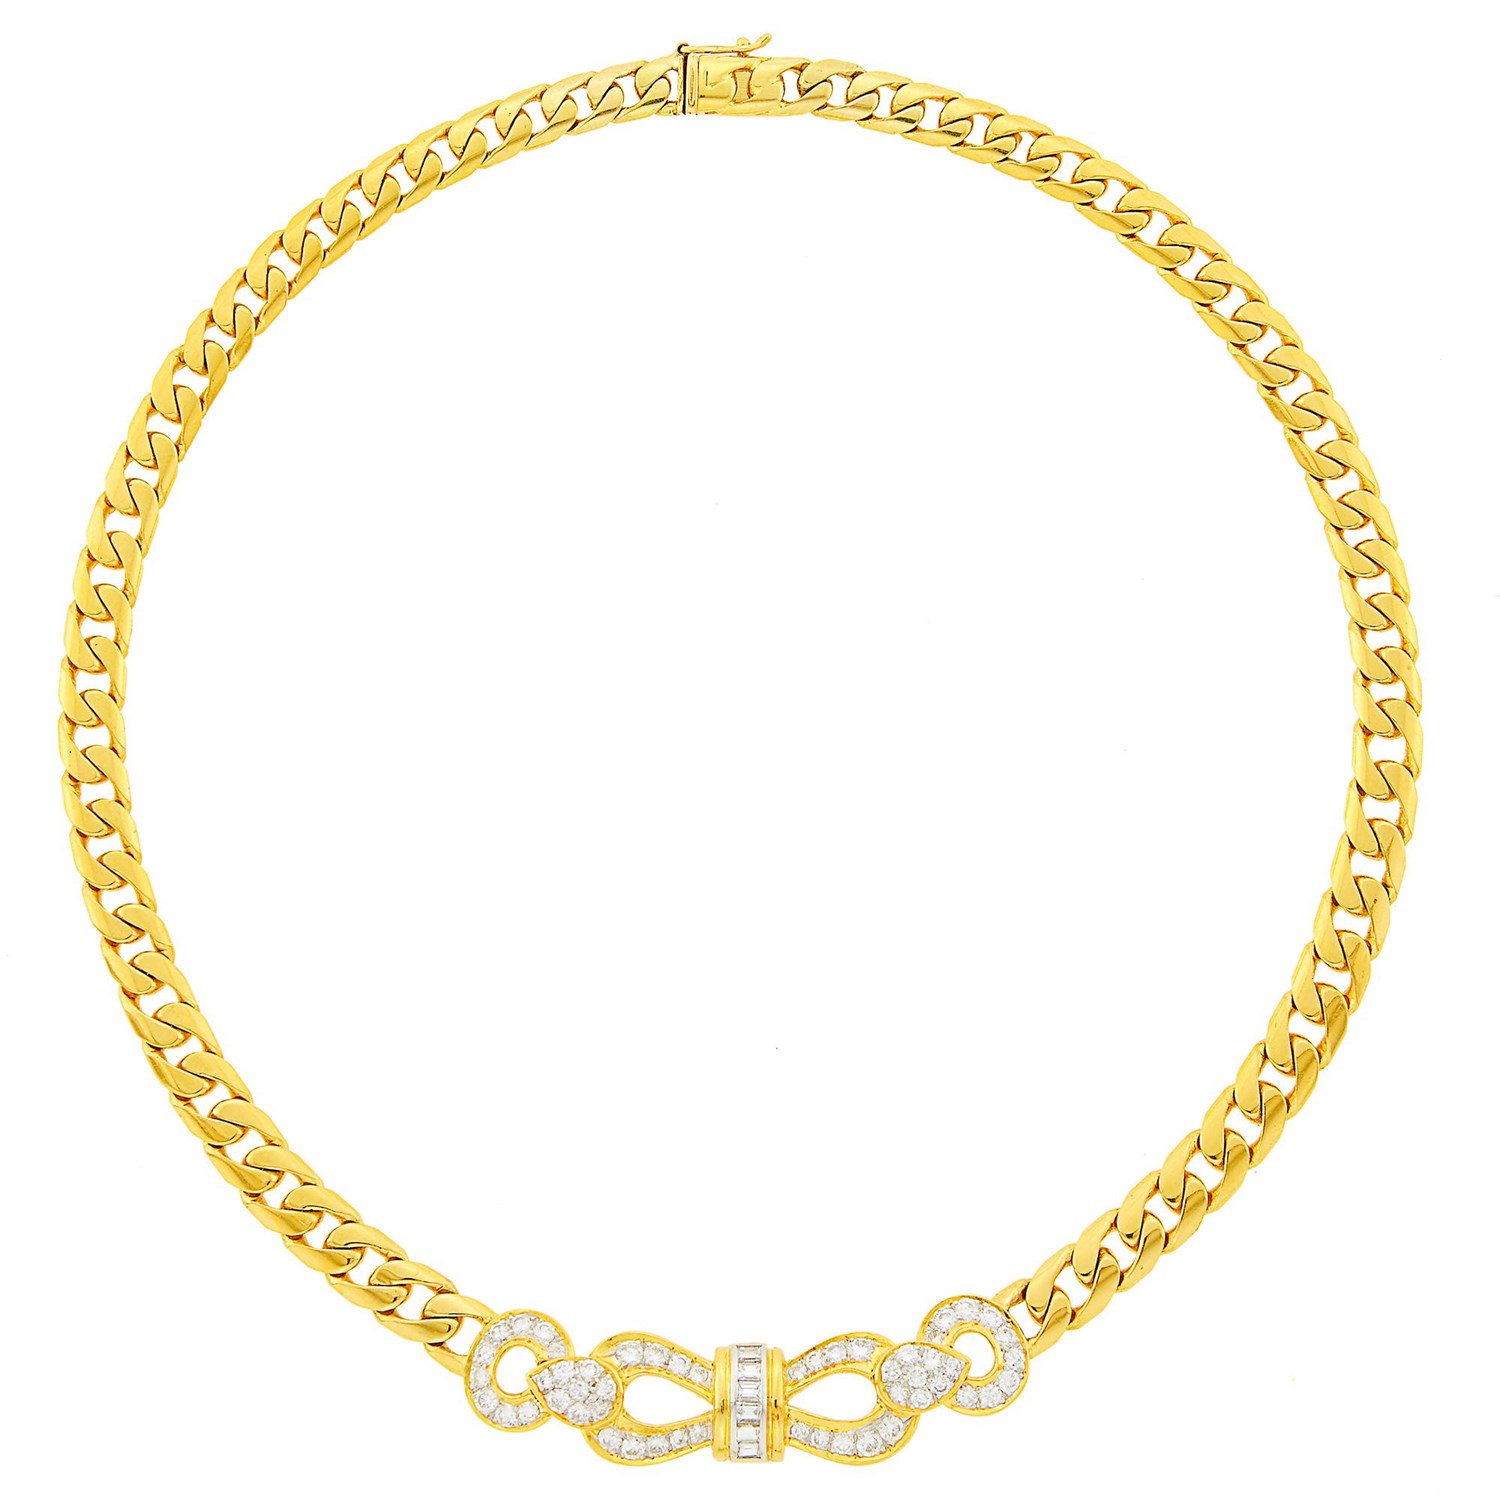 Lot 1113 - Gold and Diamond Curb Link Necklace